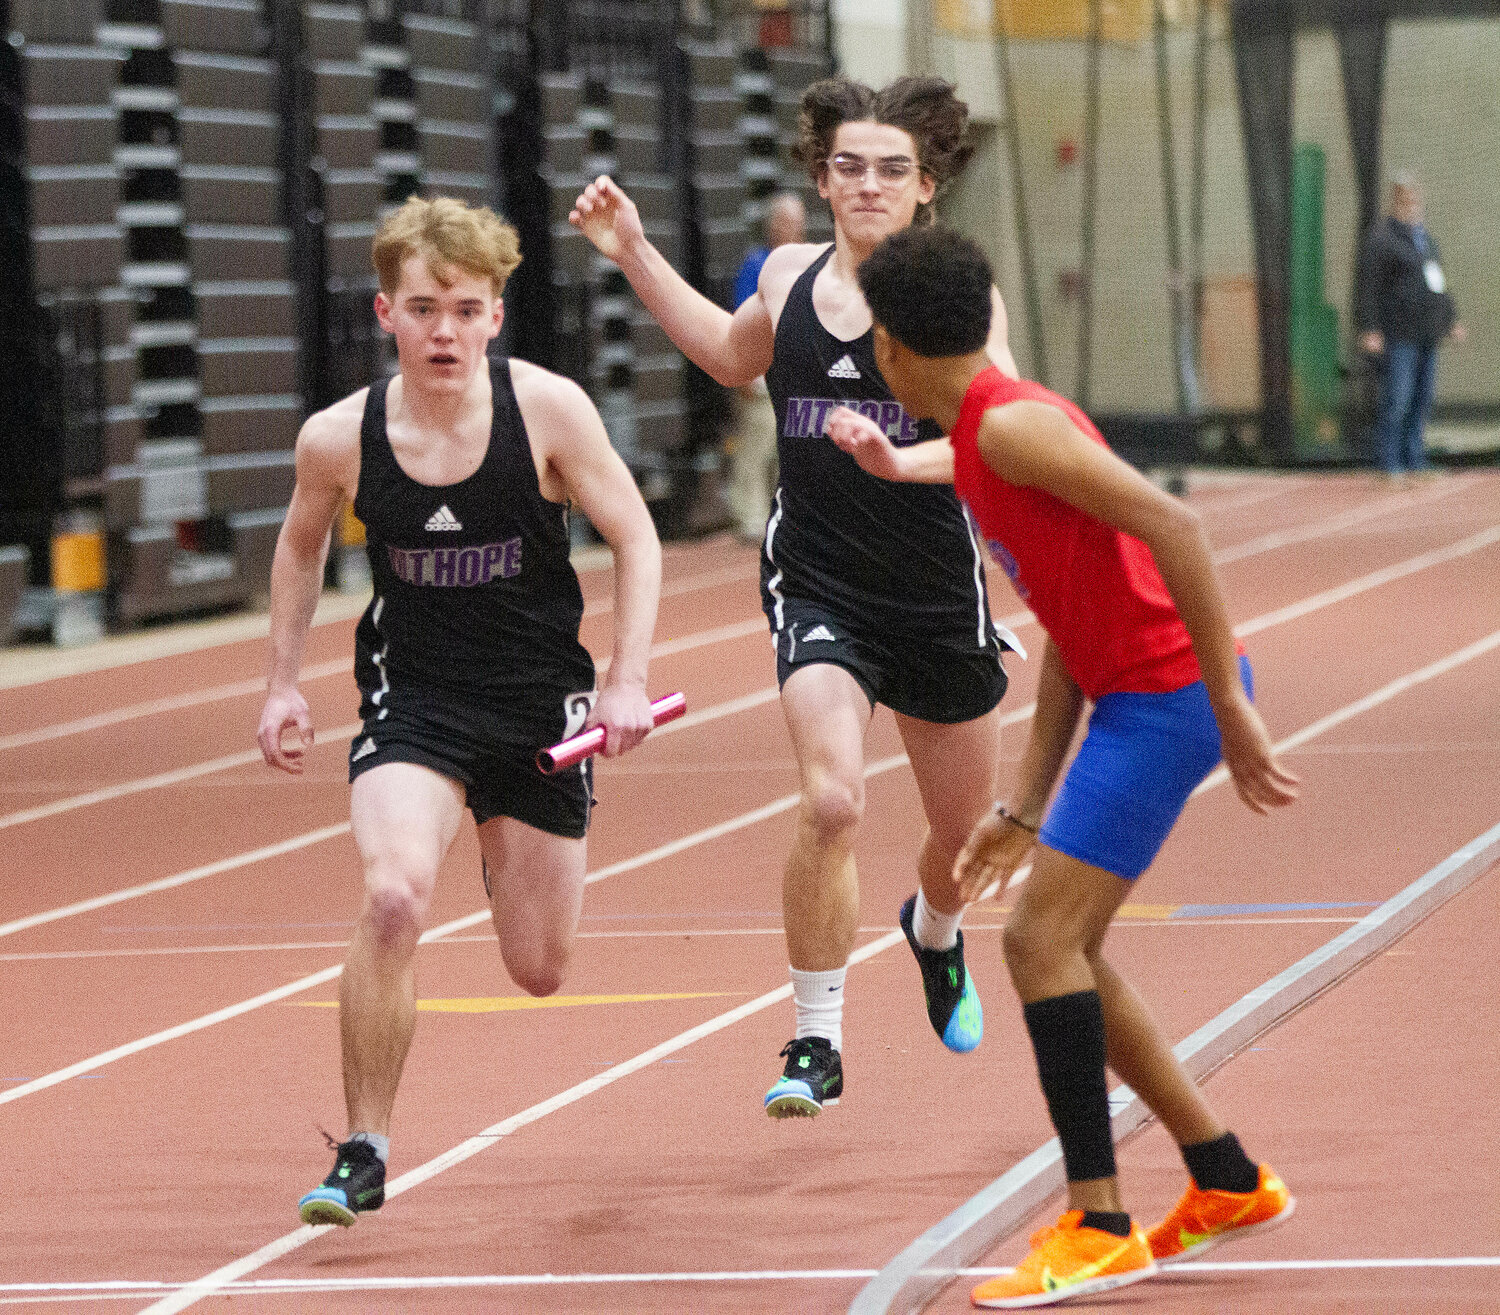 Chris Moniz (middle) hands the baton to Tyler Scarborough (left) during the 4x200 meter relay.